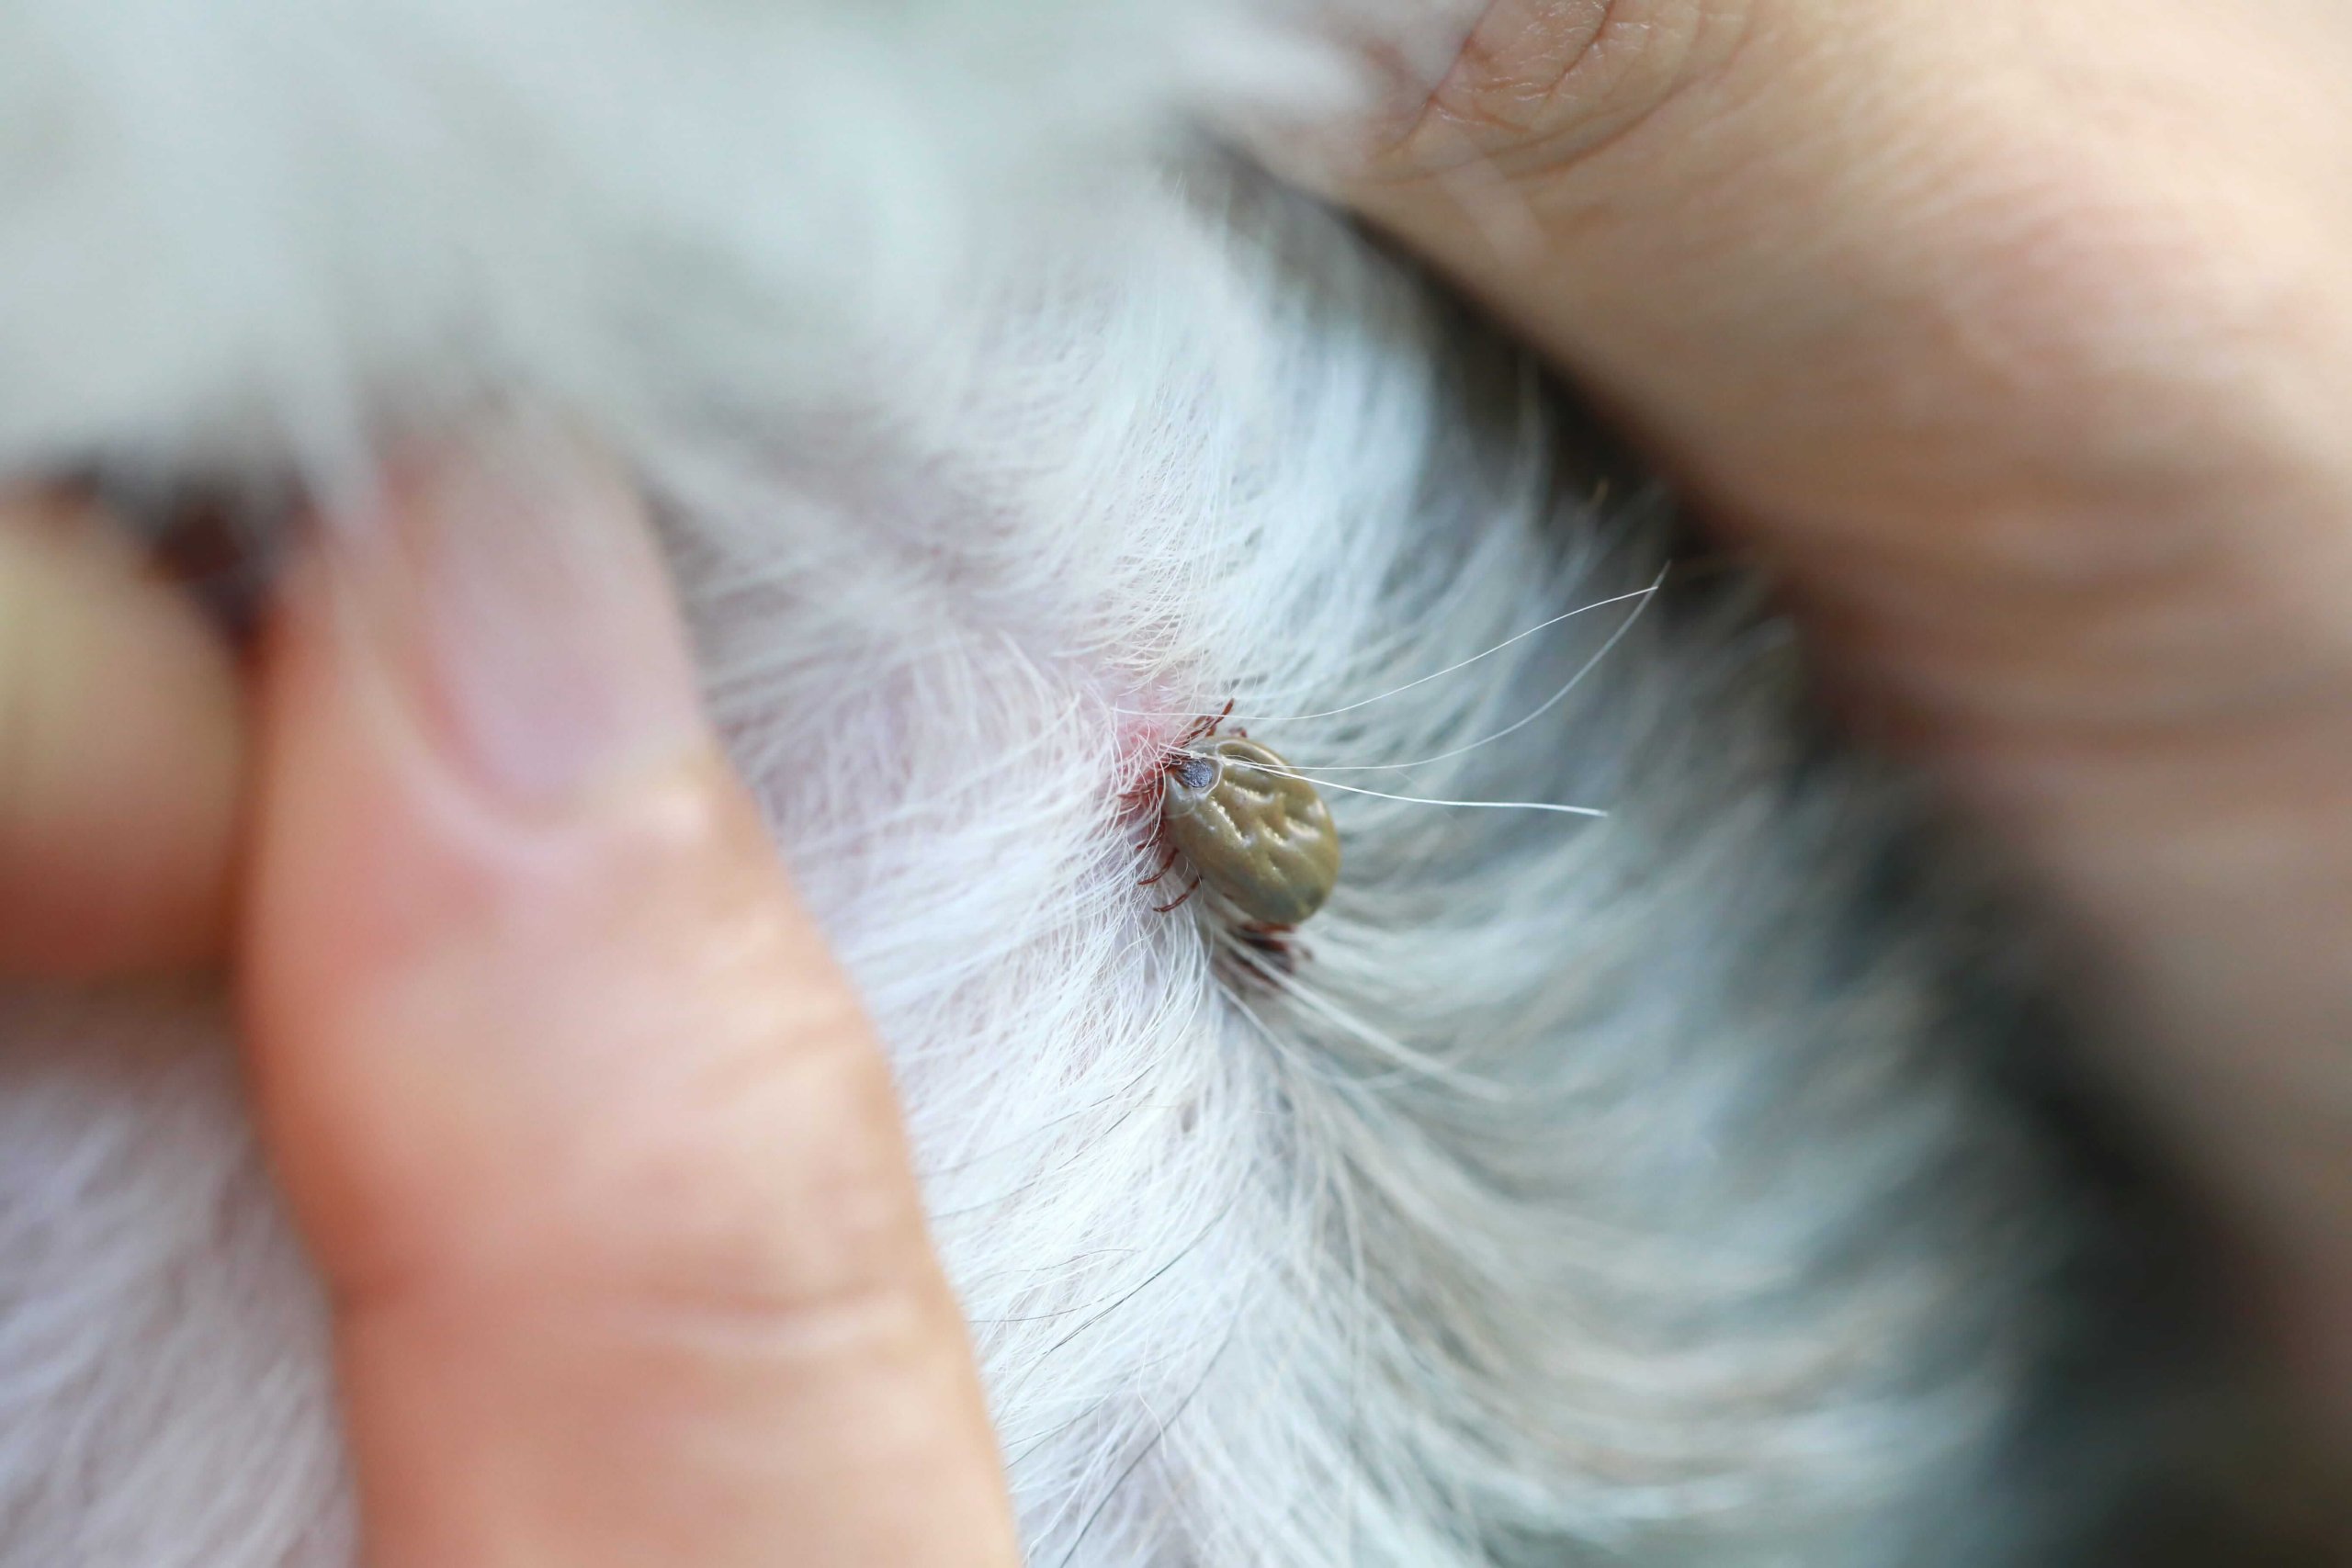 what to do after removing a tick from a dog